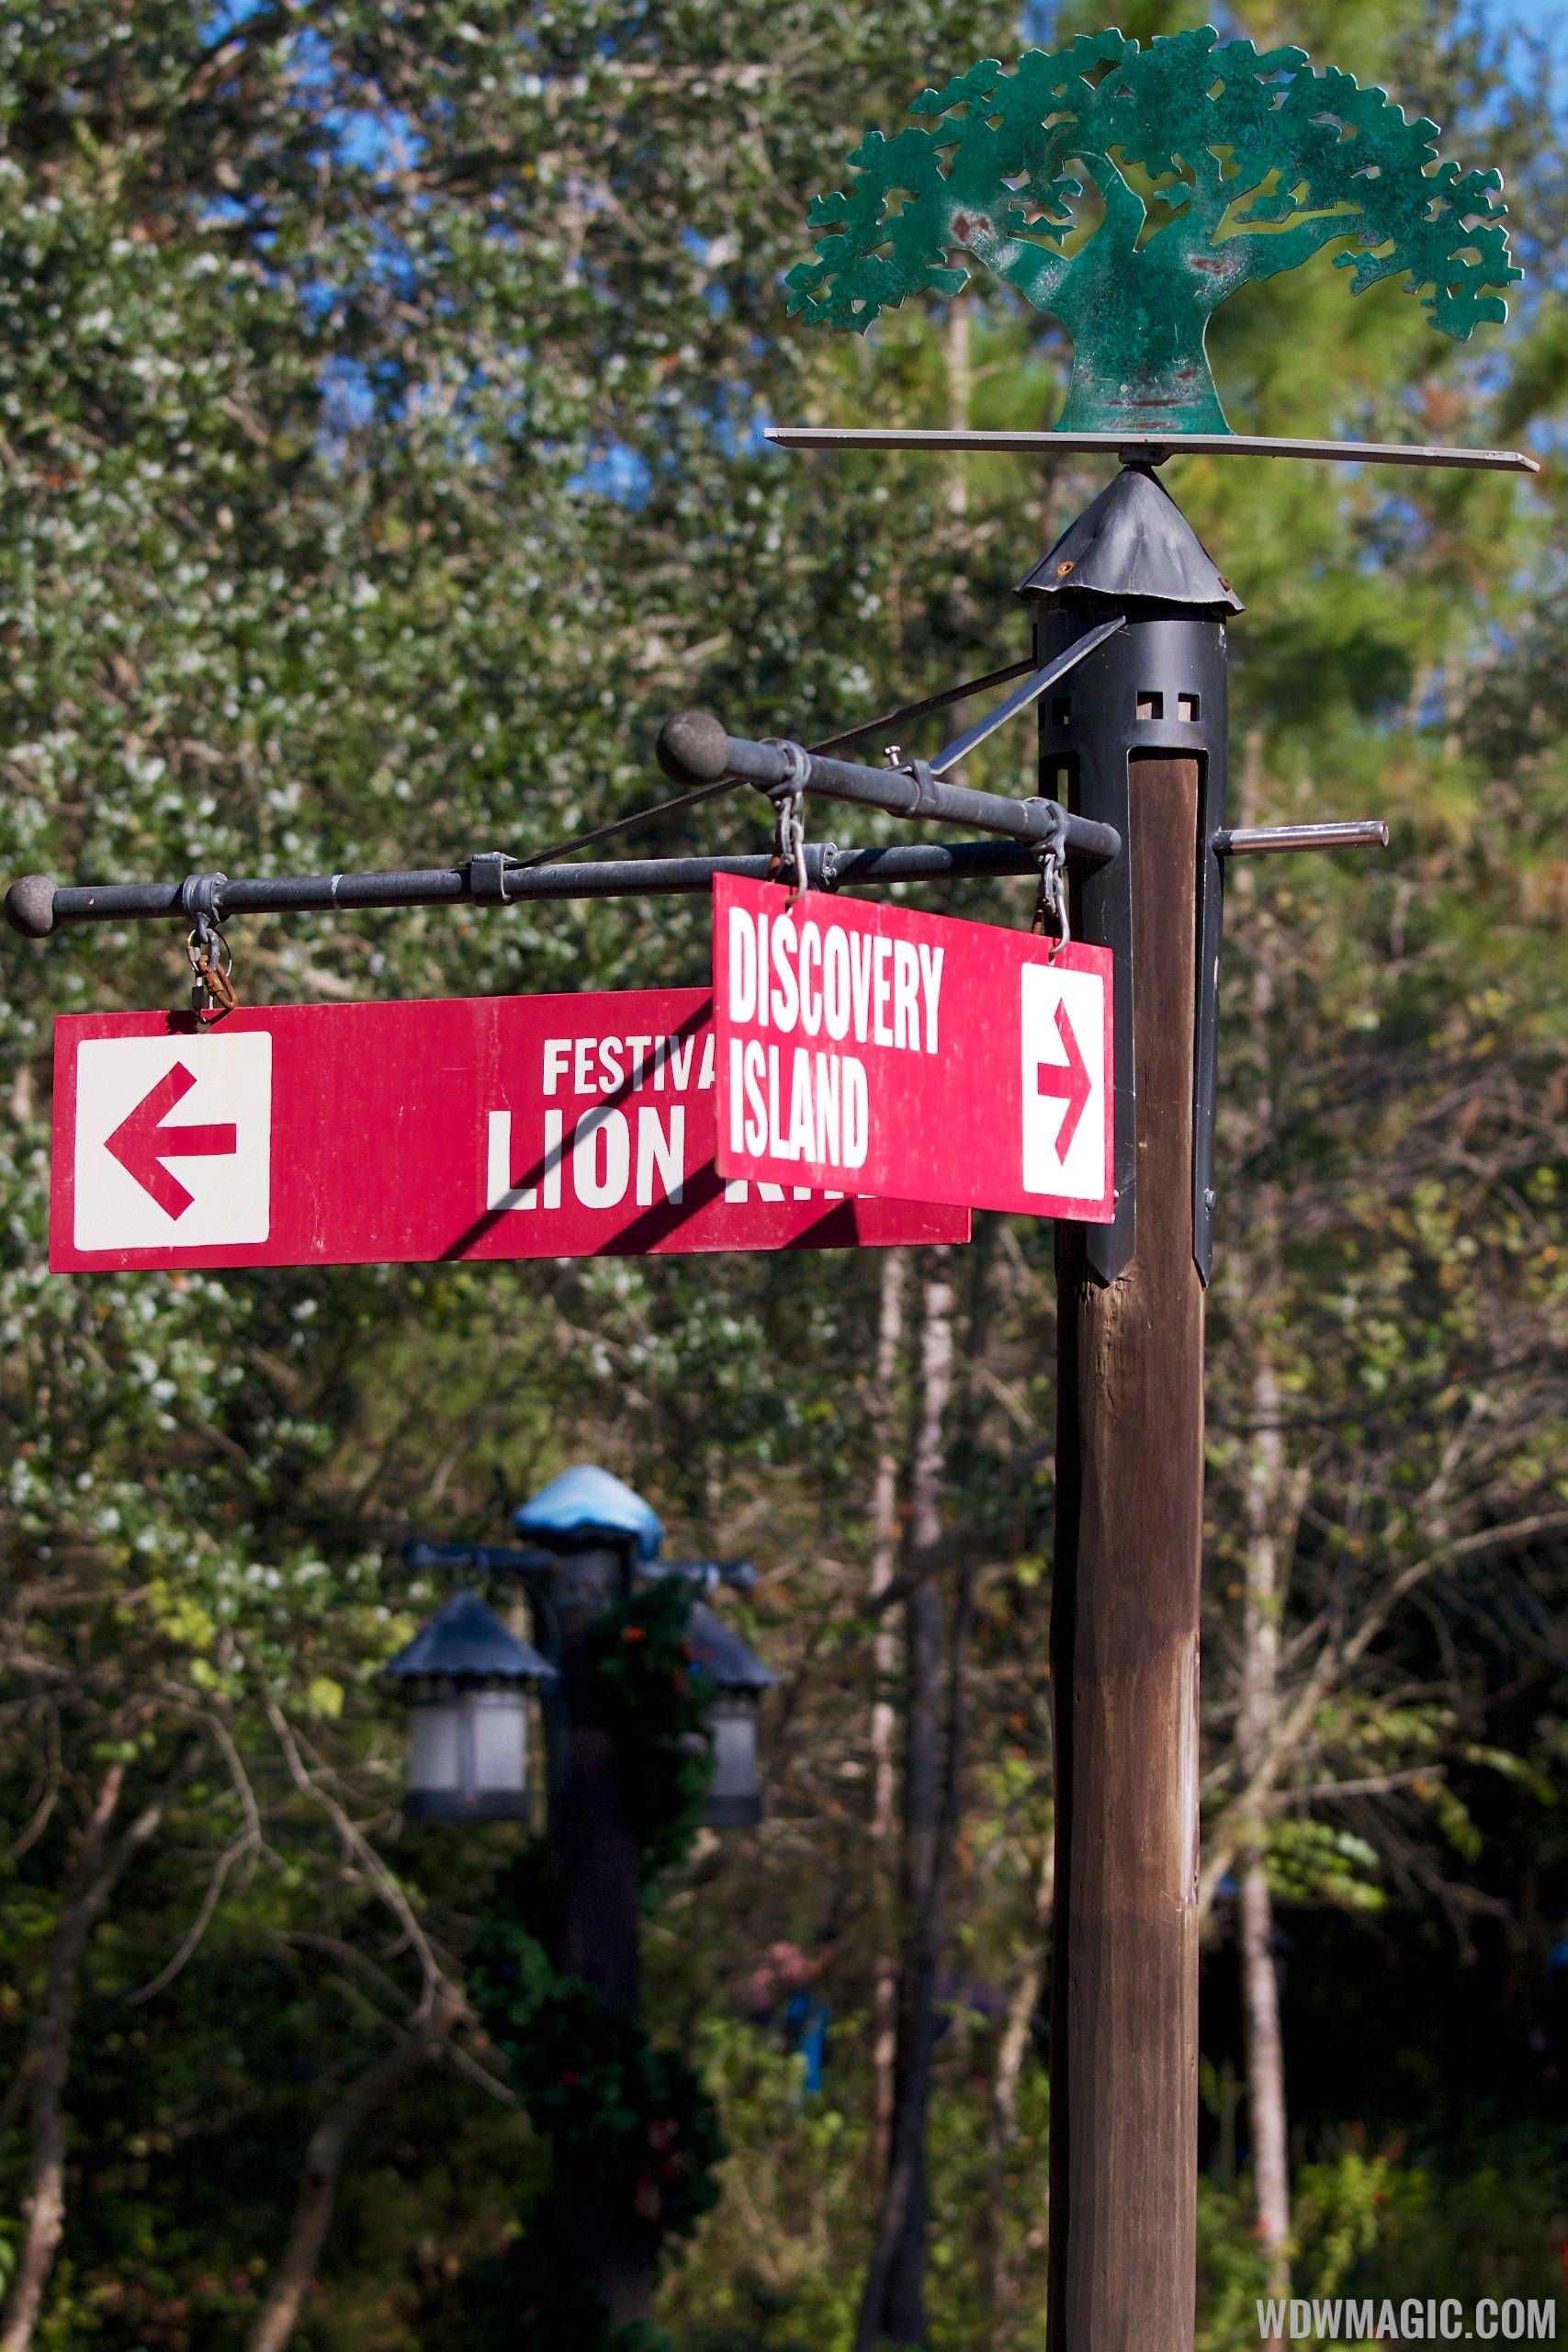 Camp Minnie-Mickey - Directional signage